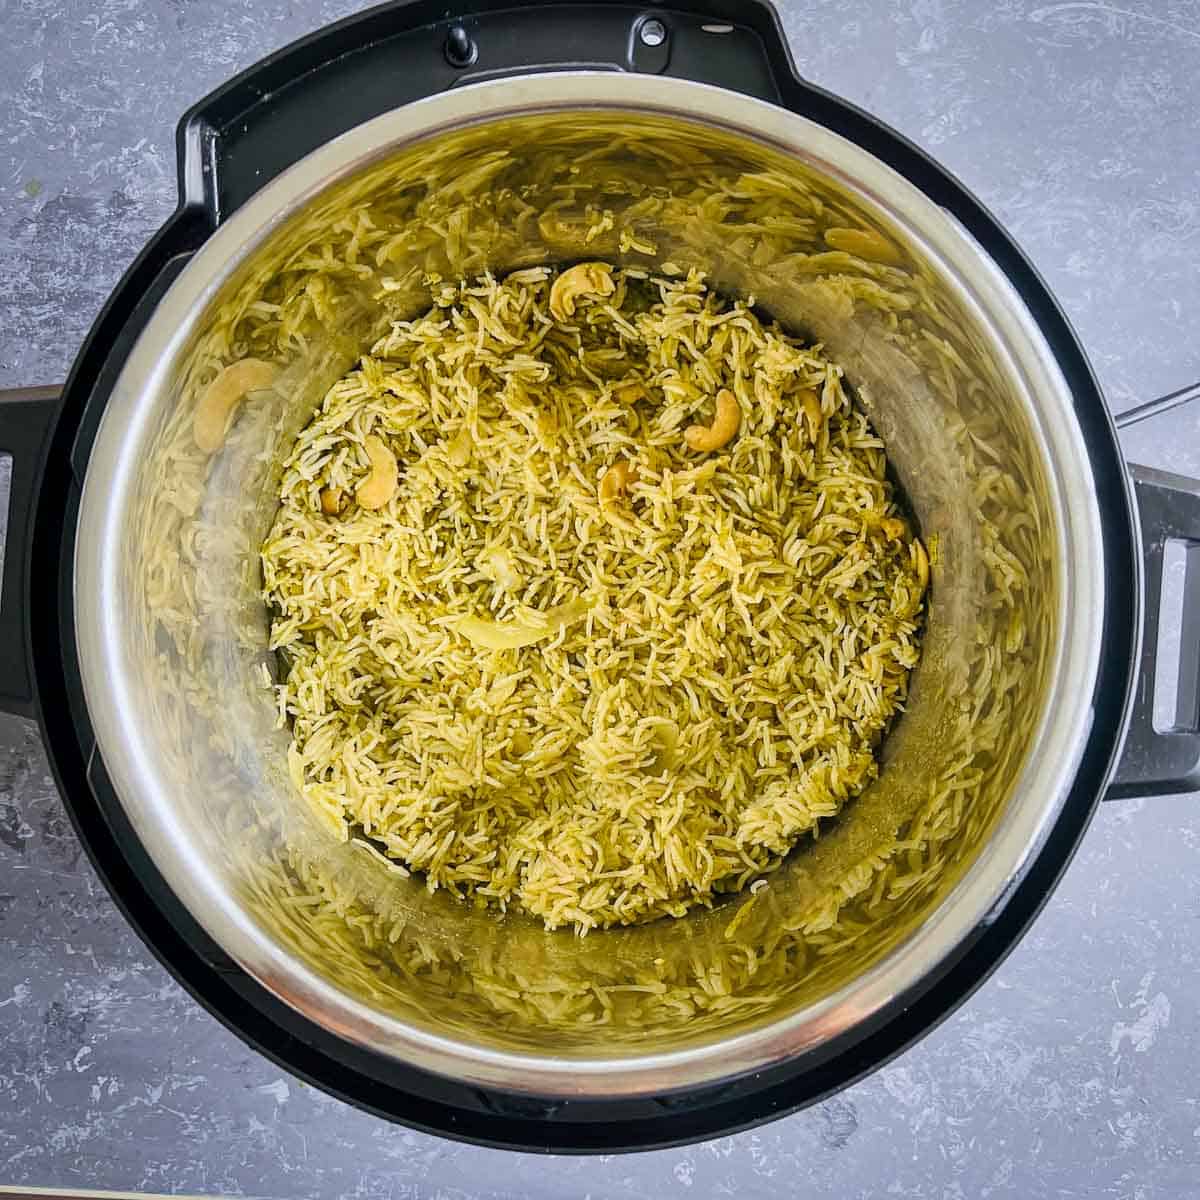 Step showing cilantro rice after pressure cooking in the Instant Pot.